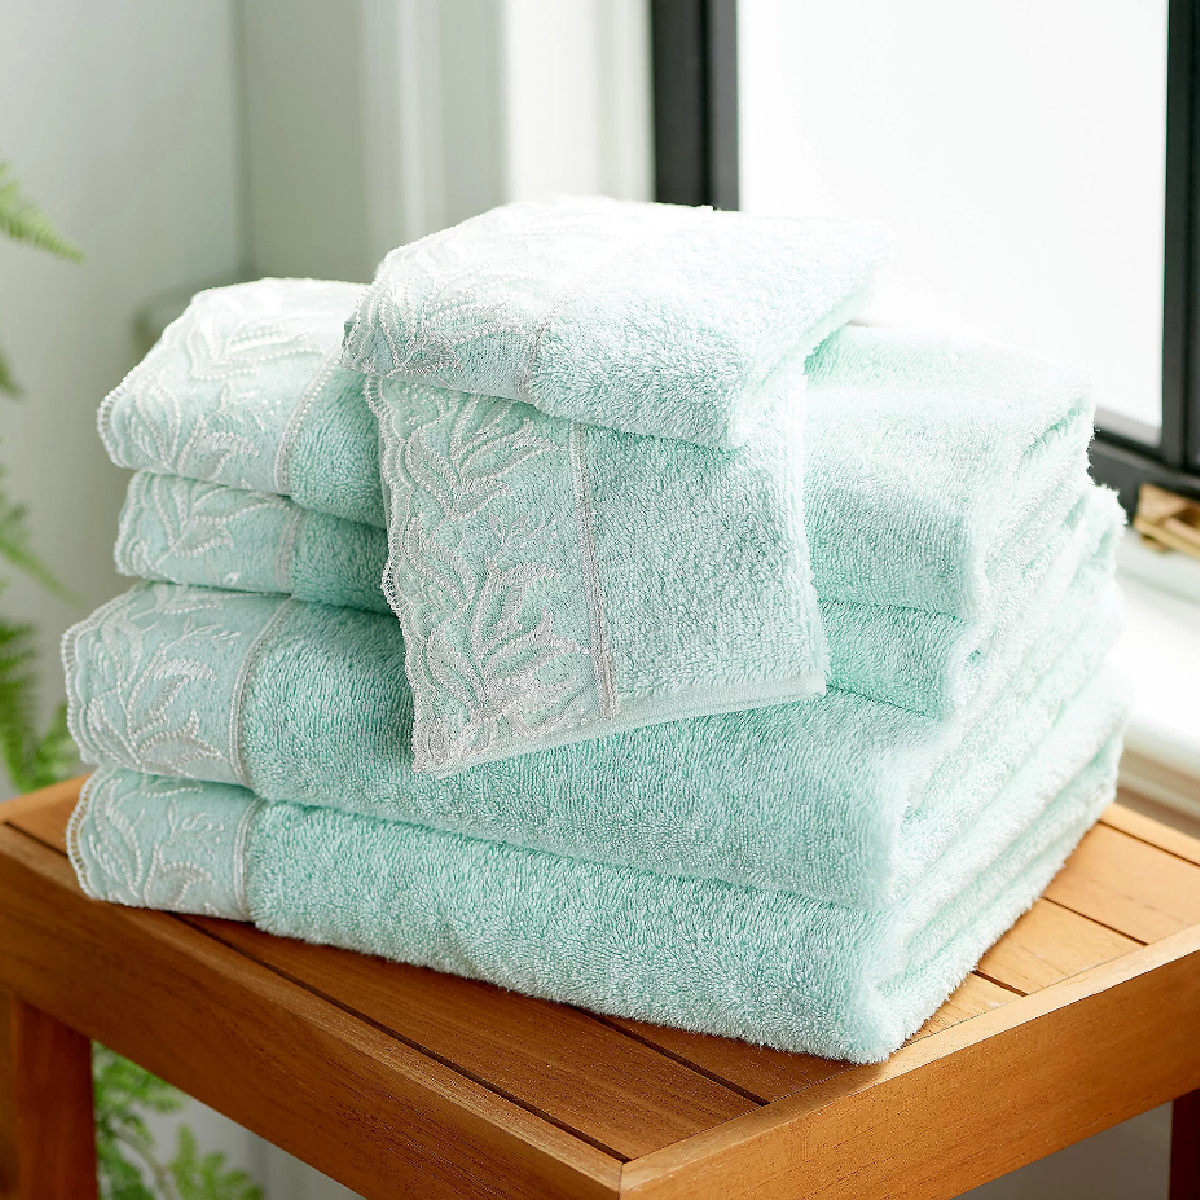 Home Reflections 6-Piece Towel Set with Lace Trim